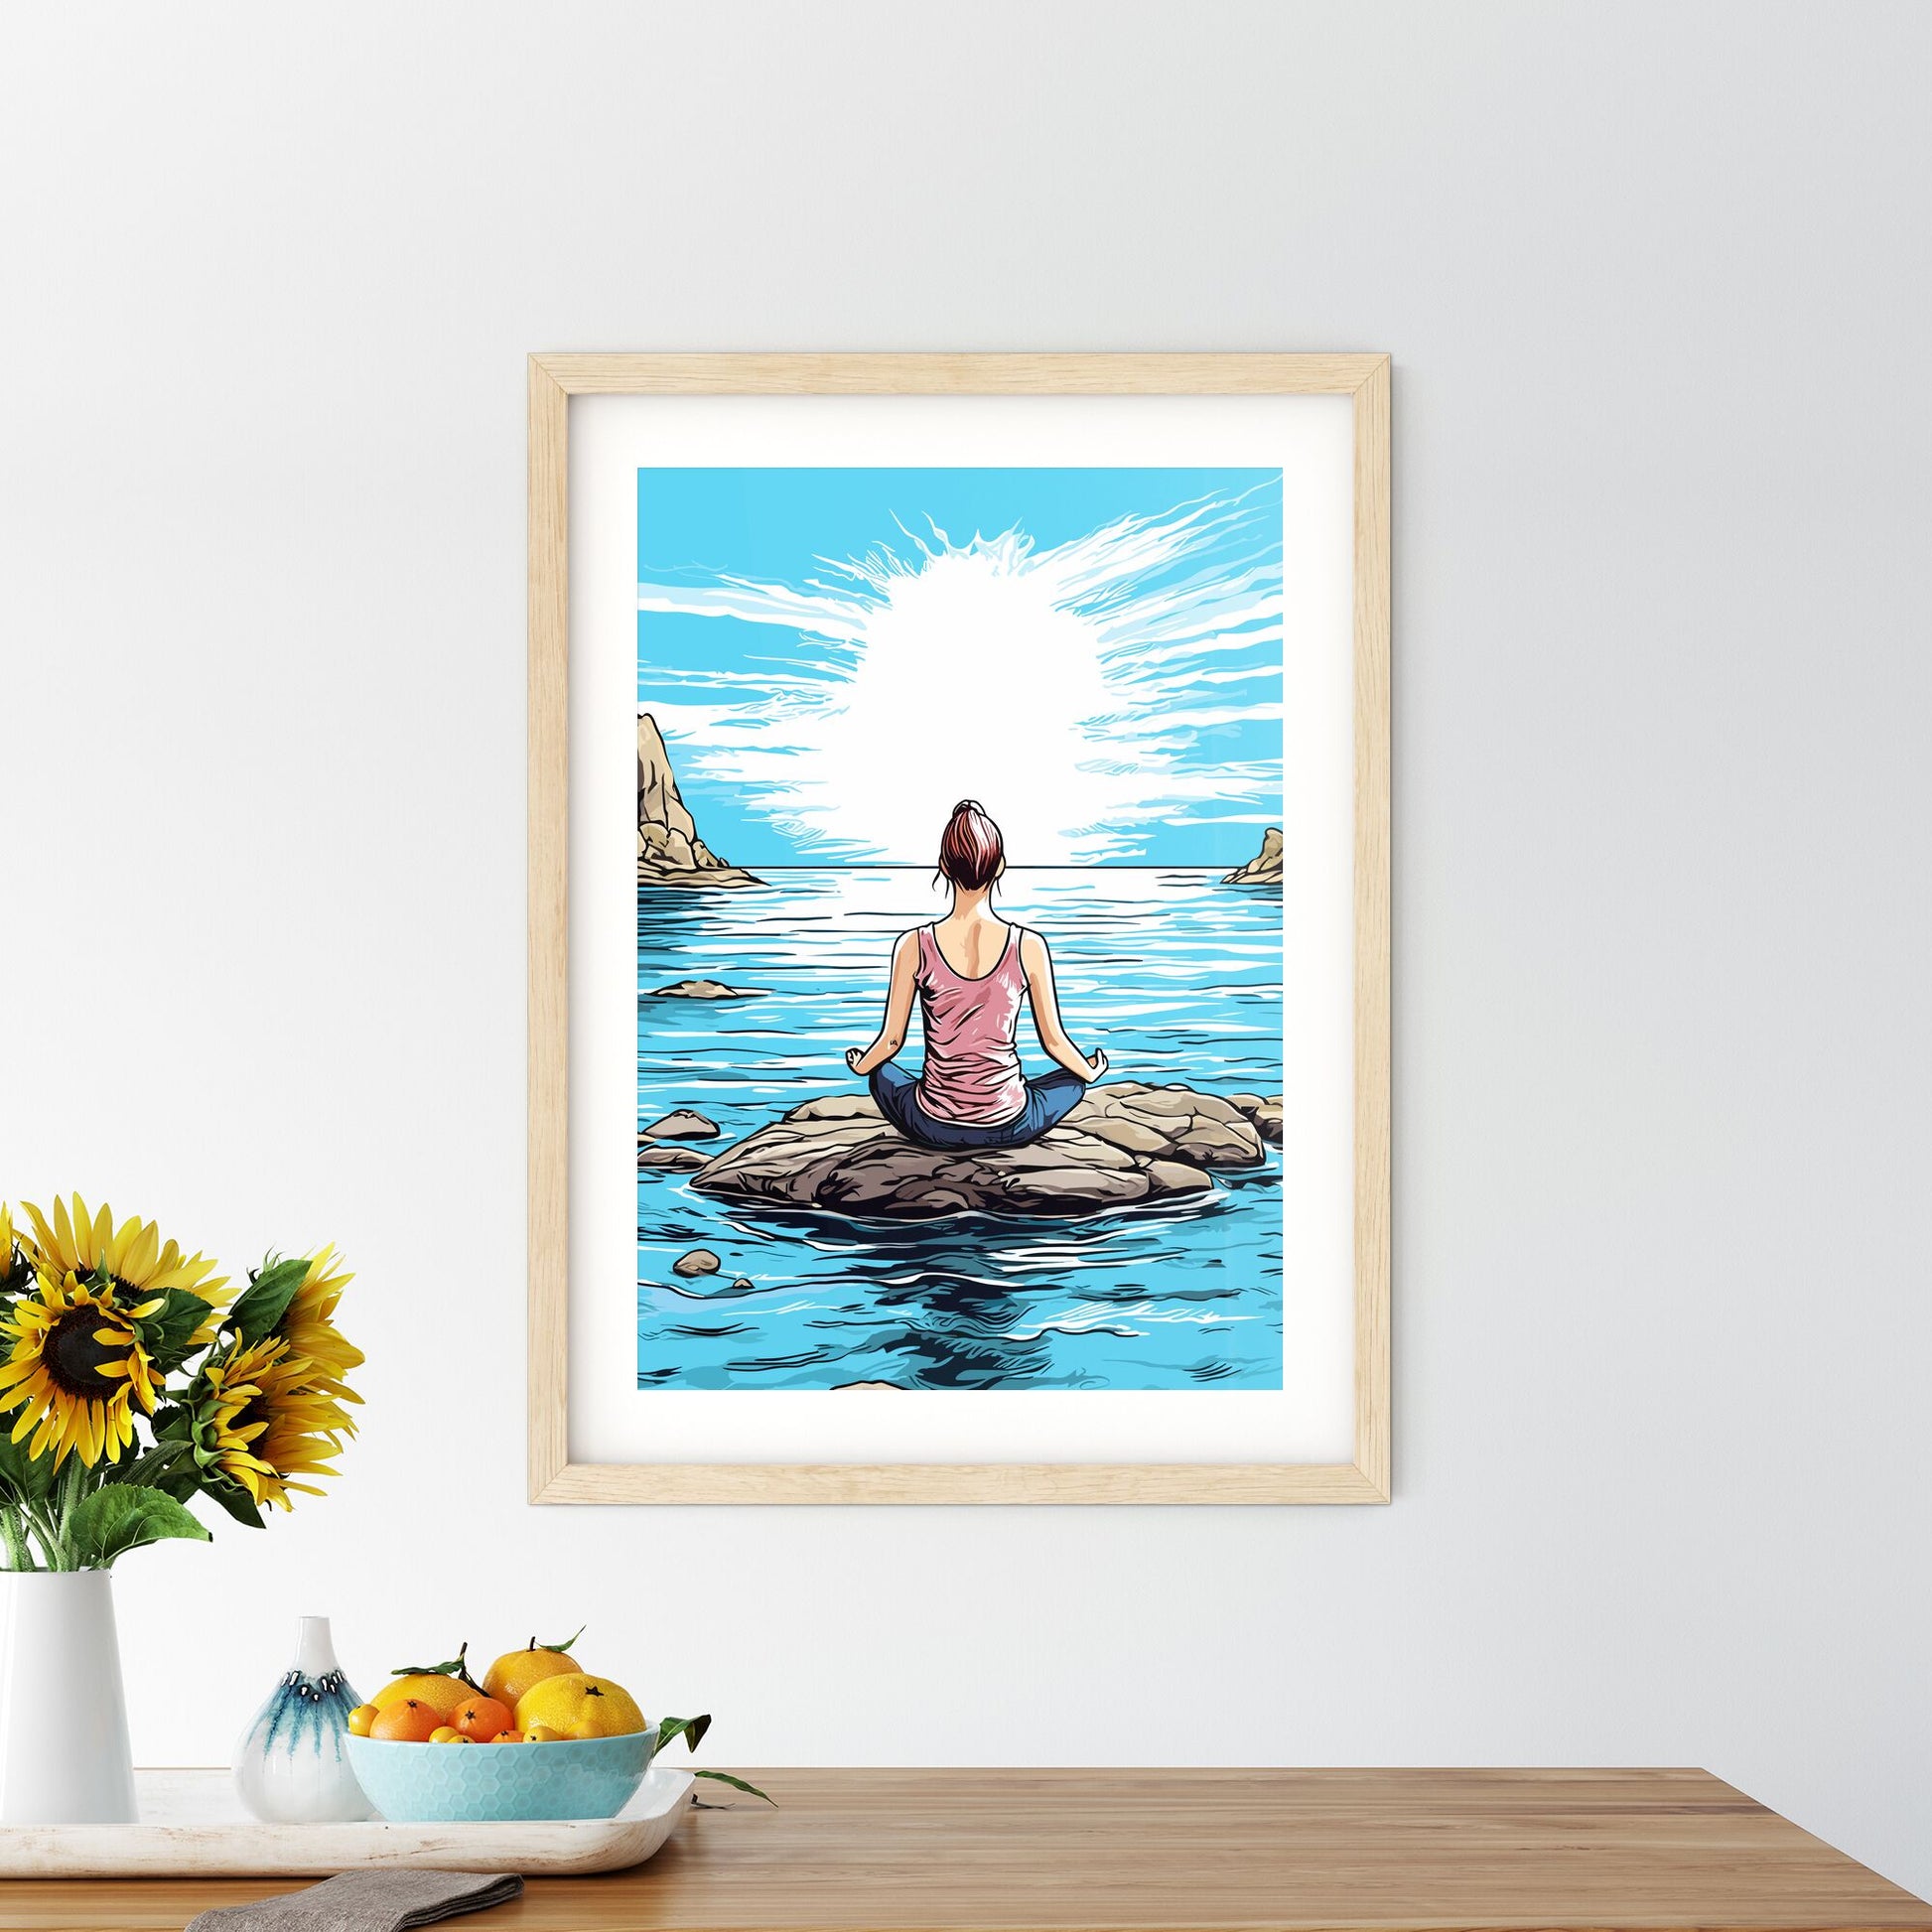 Meditation At The Aegean Sea - A Woman Sitting On A Rock In The Water Default Title